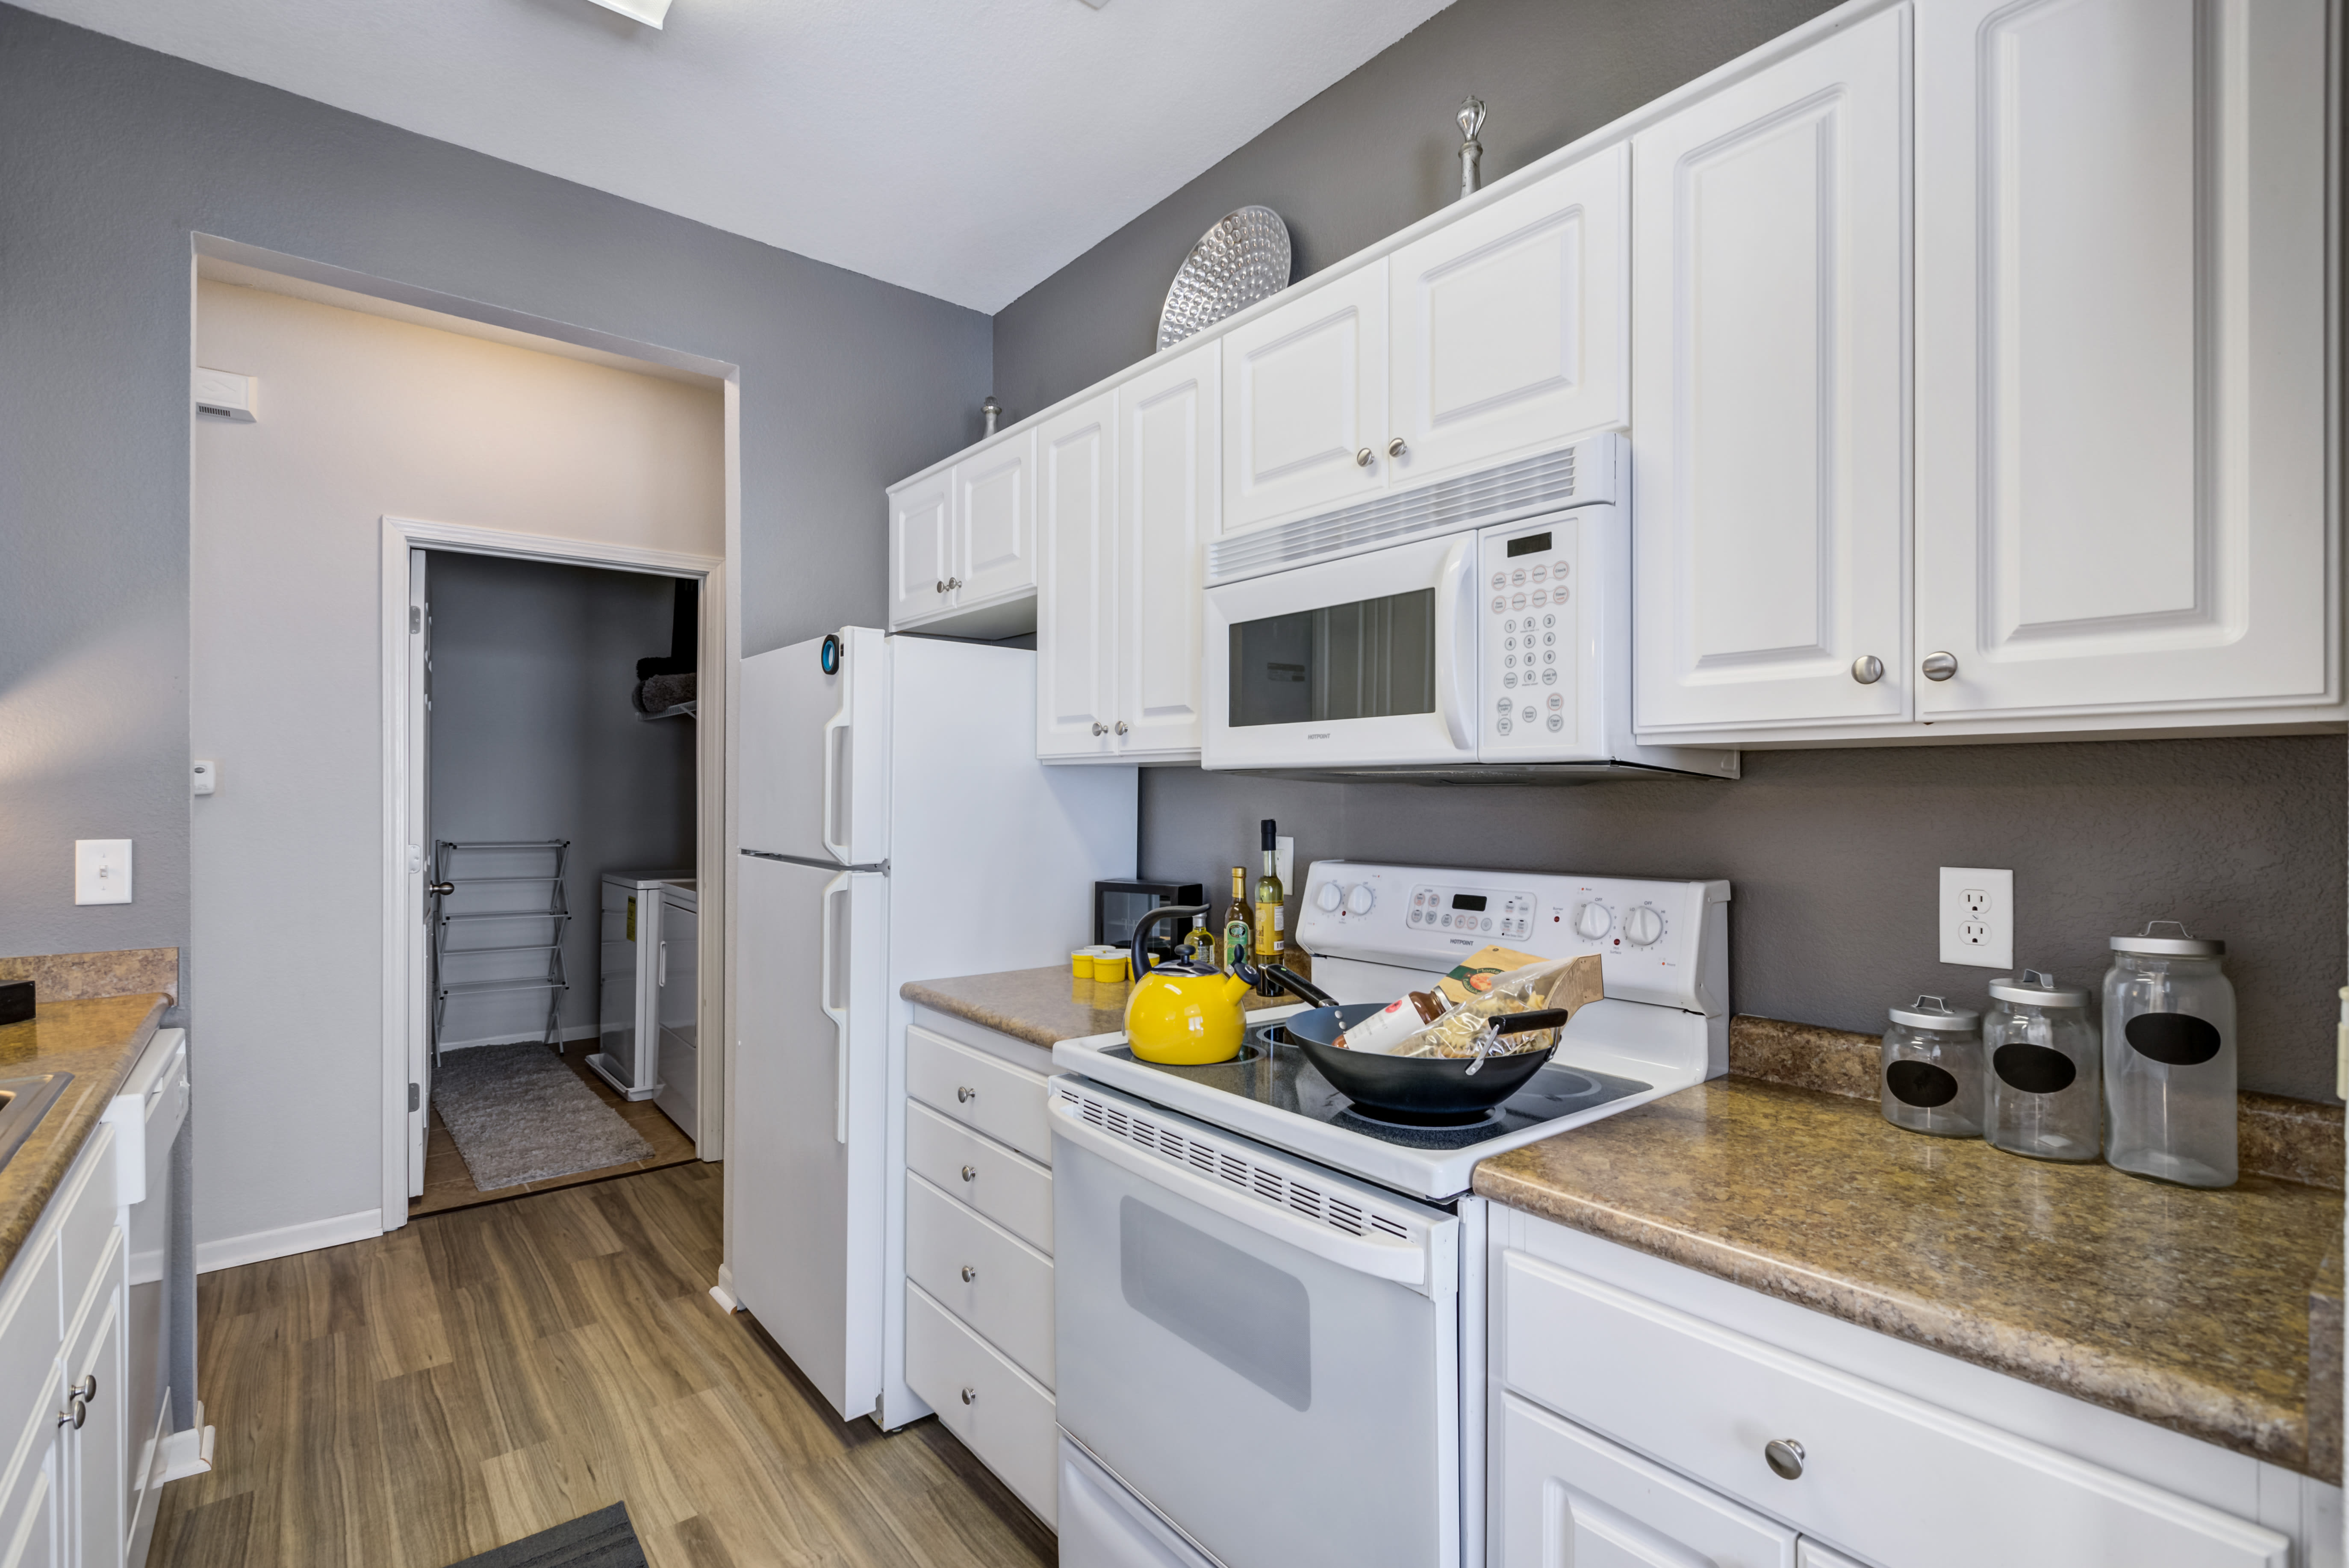 Kitchen with white cabinets and stainless-steel sink at Alvadora Apartments in Lawrence, Kansas